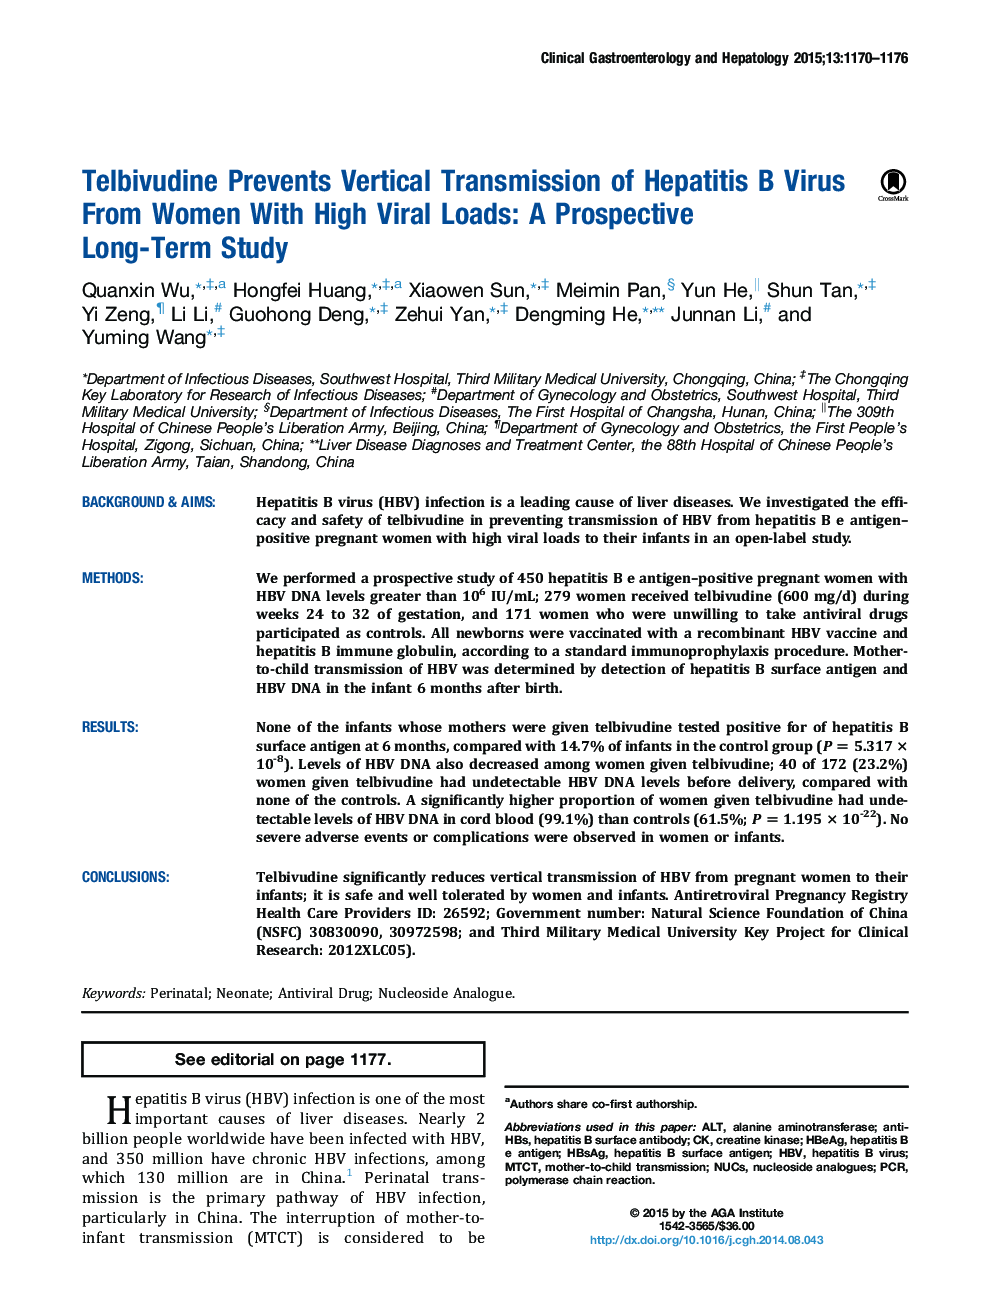 Telbivudine Prevents Vertical Transmission of Hepatitis B Virus From Women With High Viral Loads: A Prospective Long-Term Study